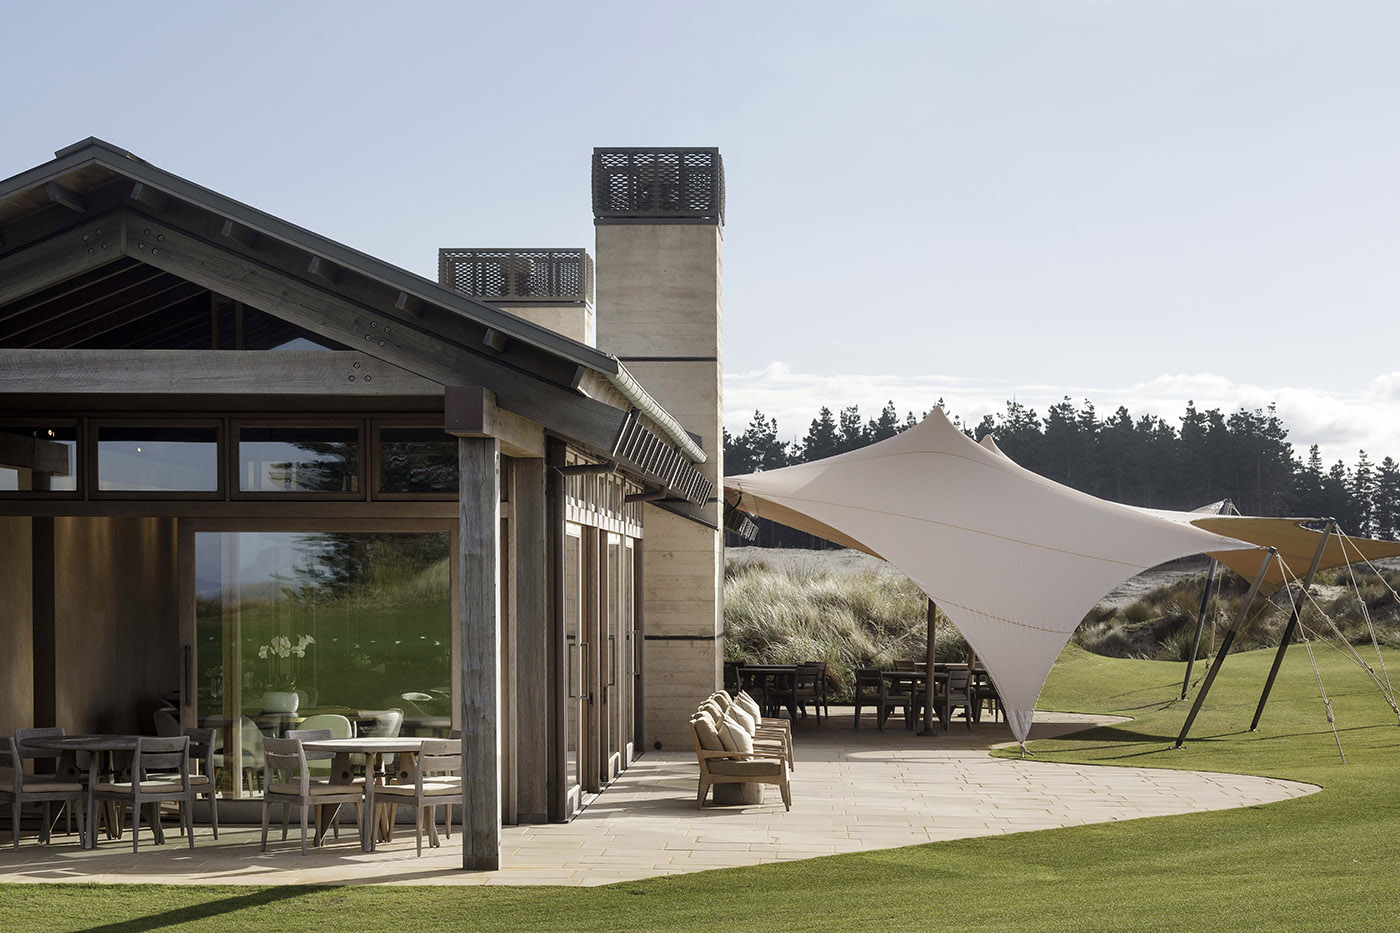 In New Zealand, golf courses, sand dunes and the sea all embrace the delicate architecture of the Tara Iti Clubhouse